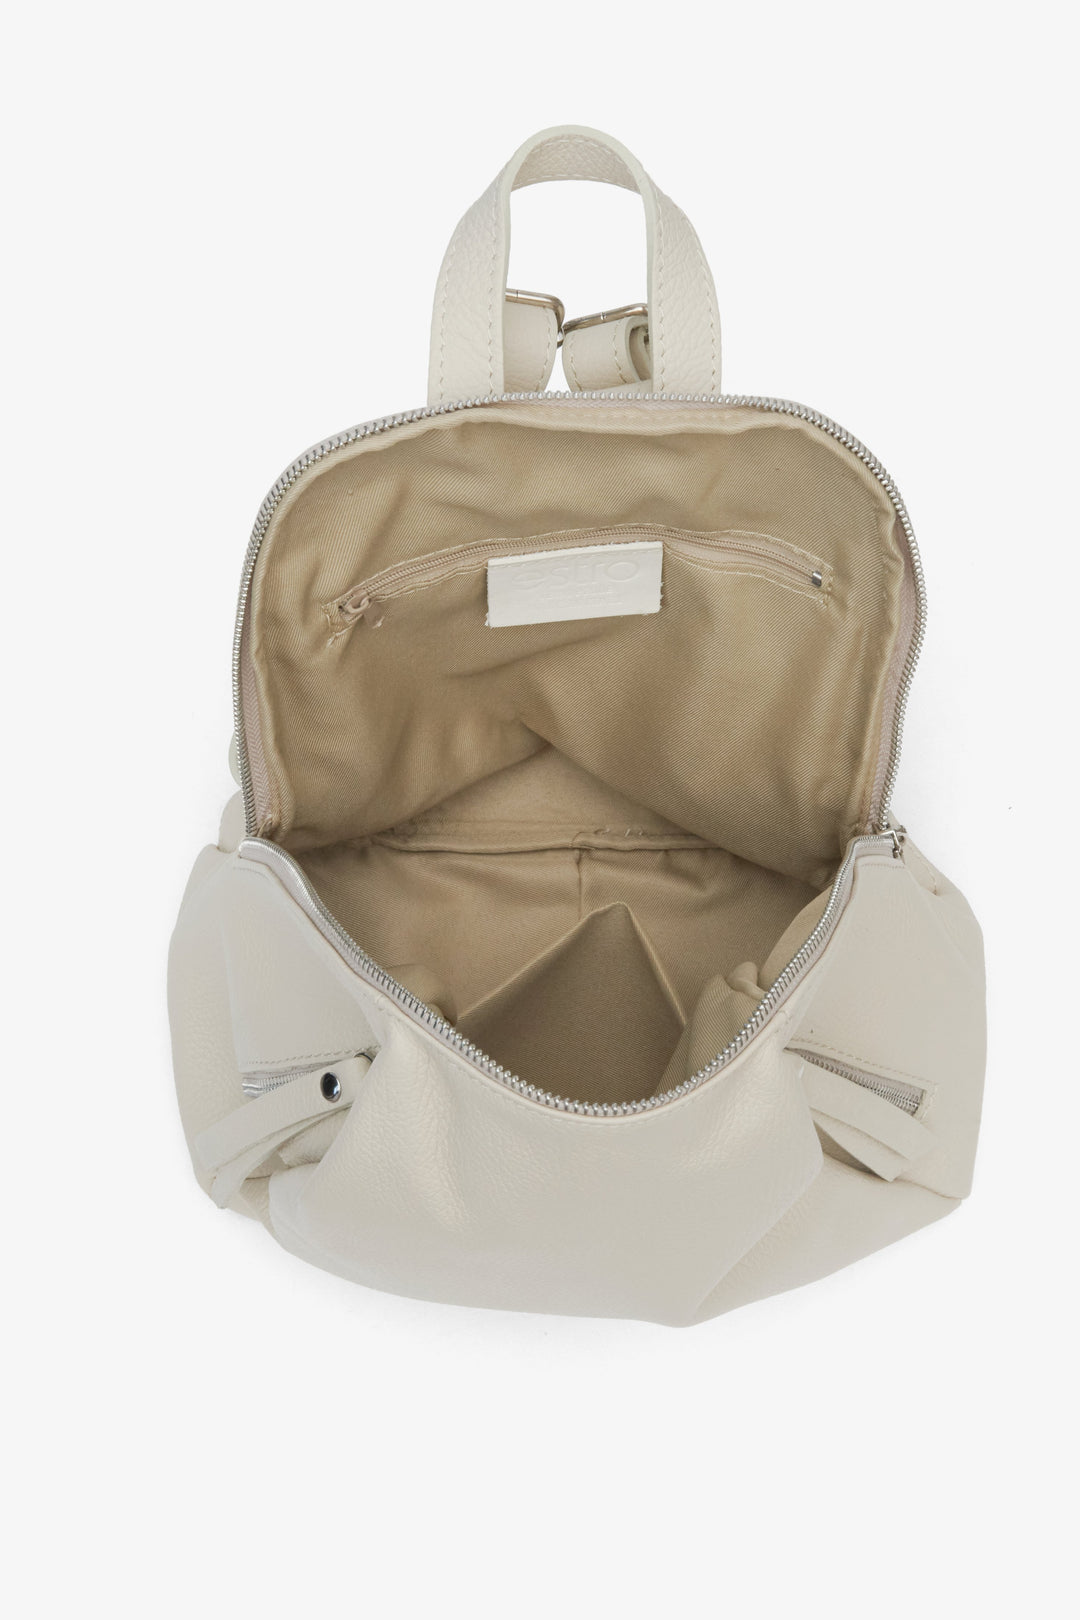 Elegant women's beige leather backpack with silver accents - close-up on the lining.